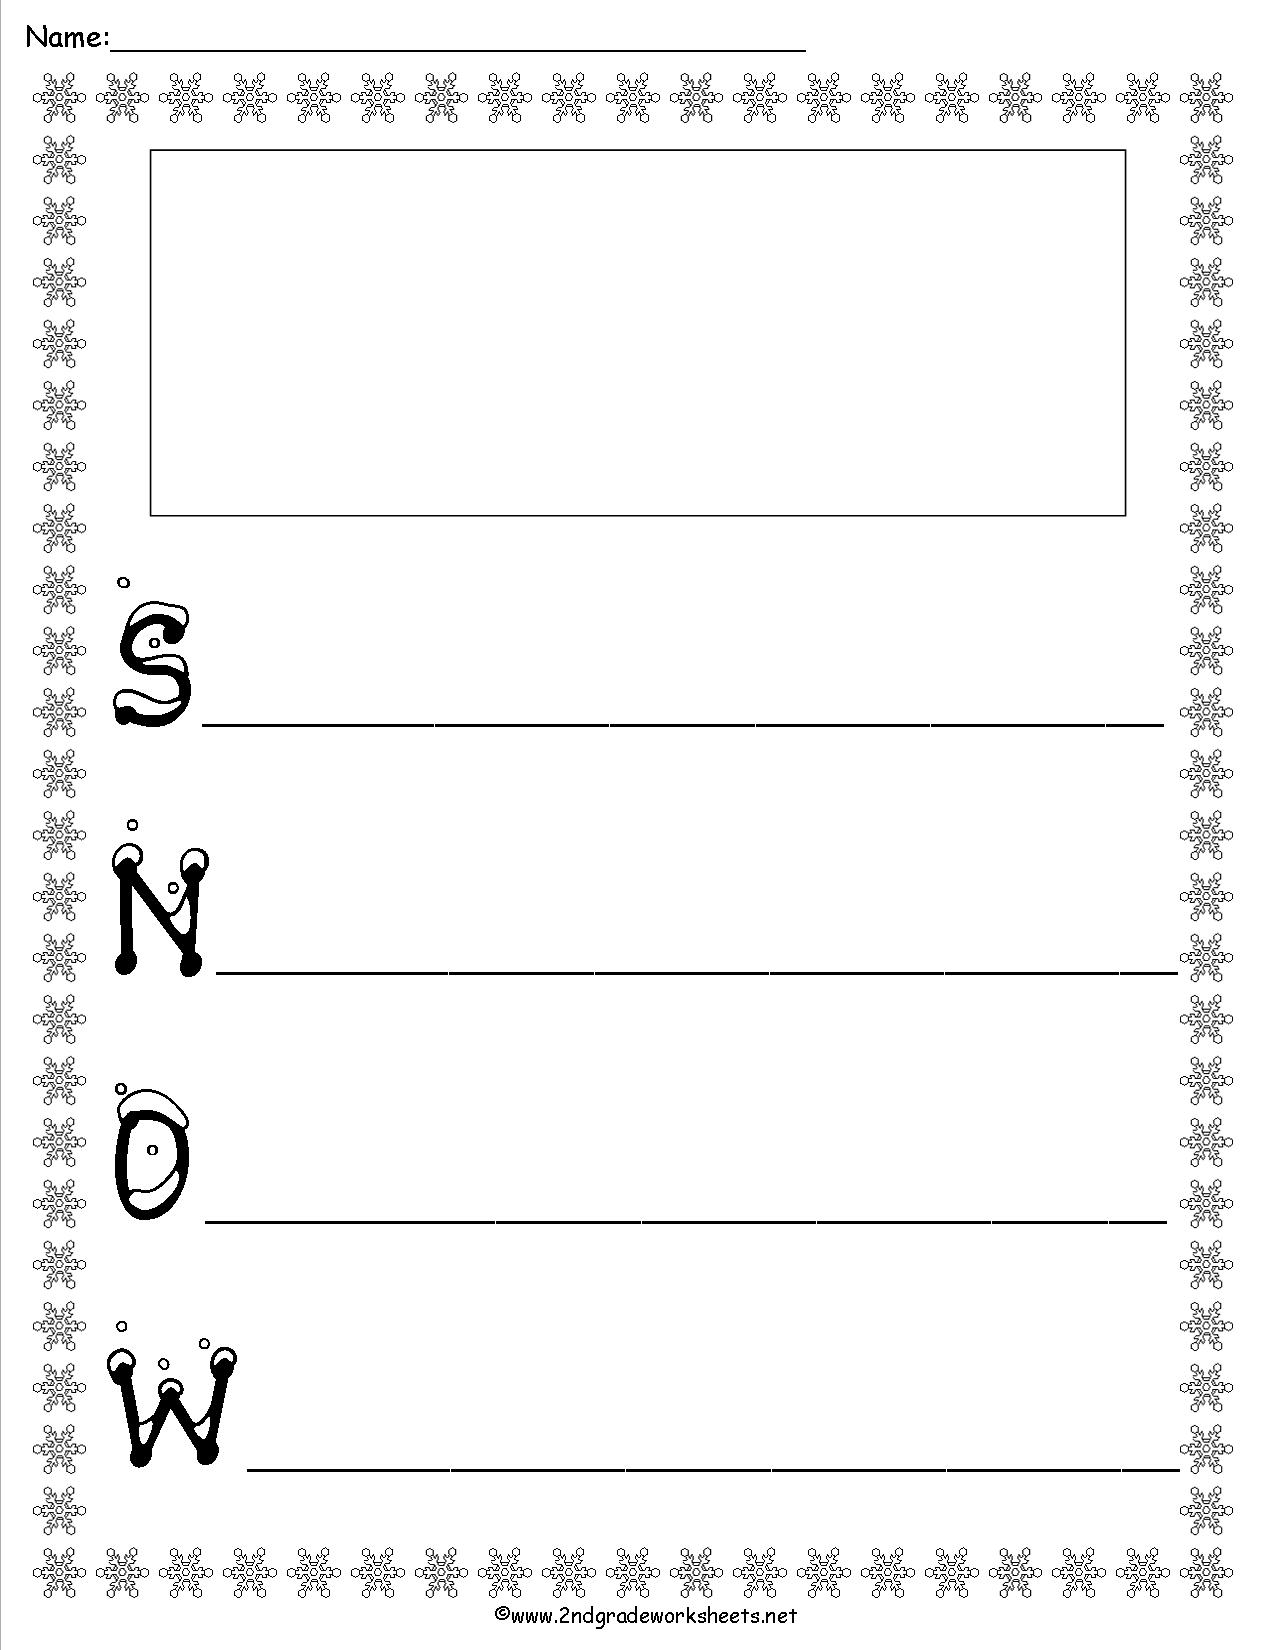 acrostic-poem-forms-templates-and-worksheets